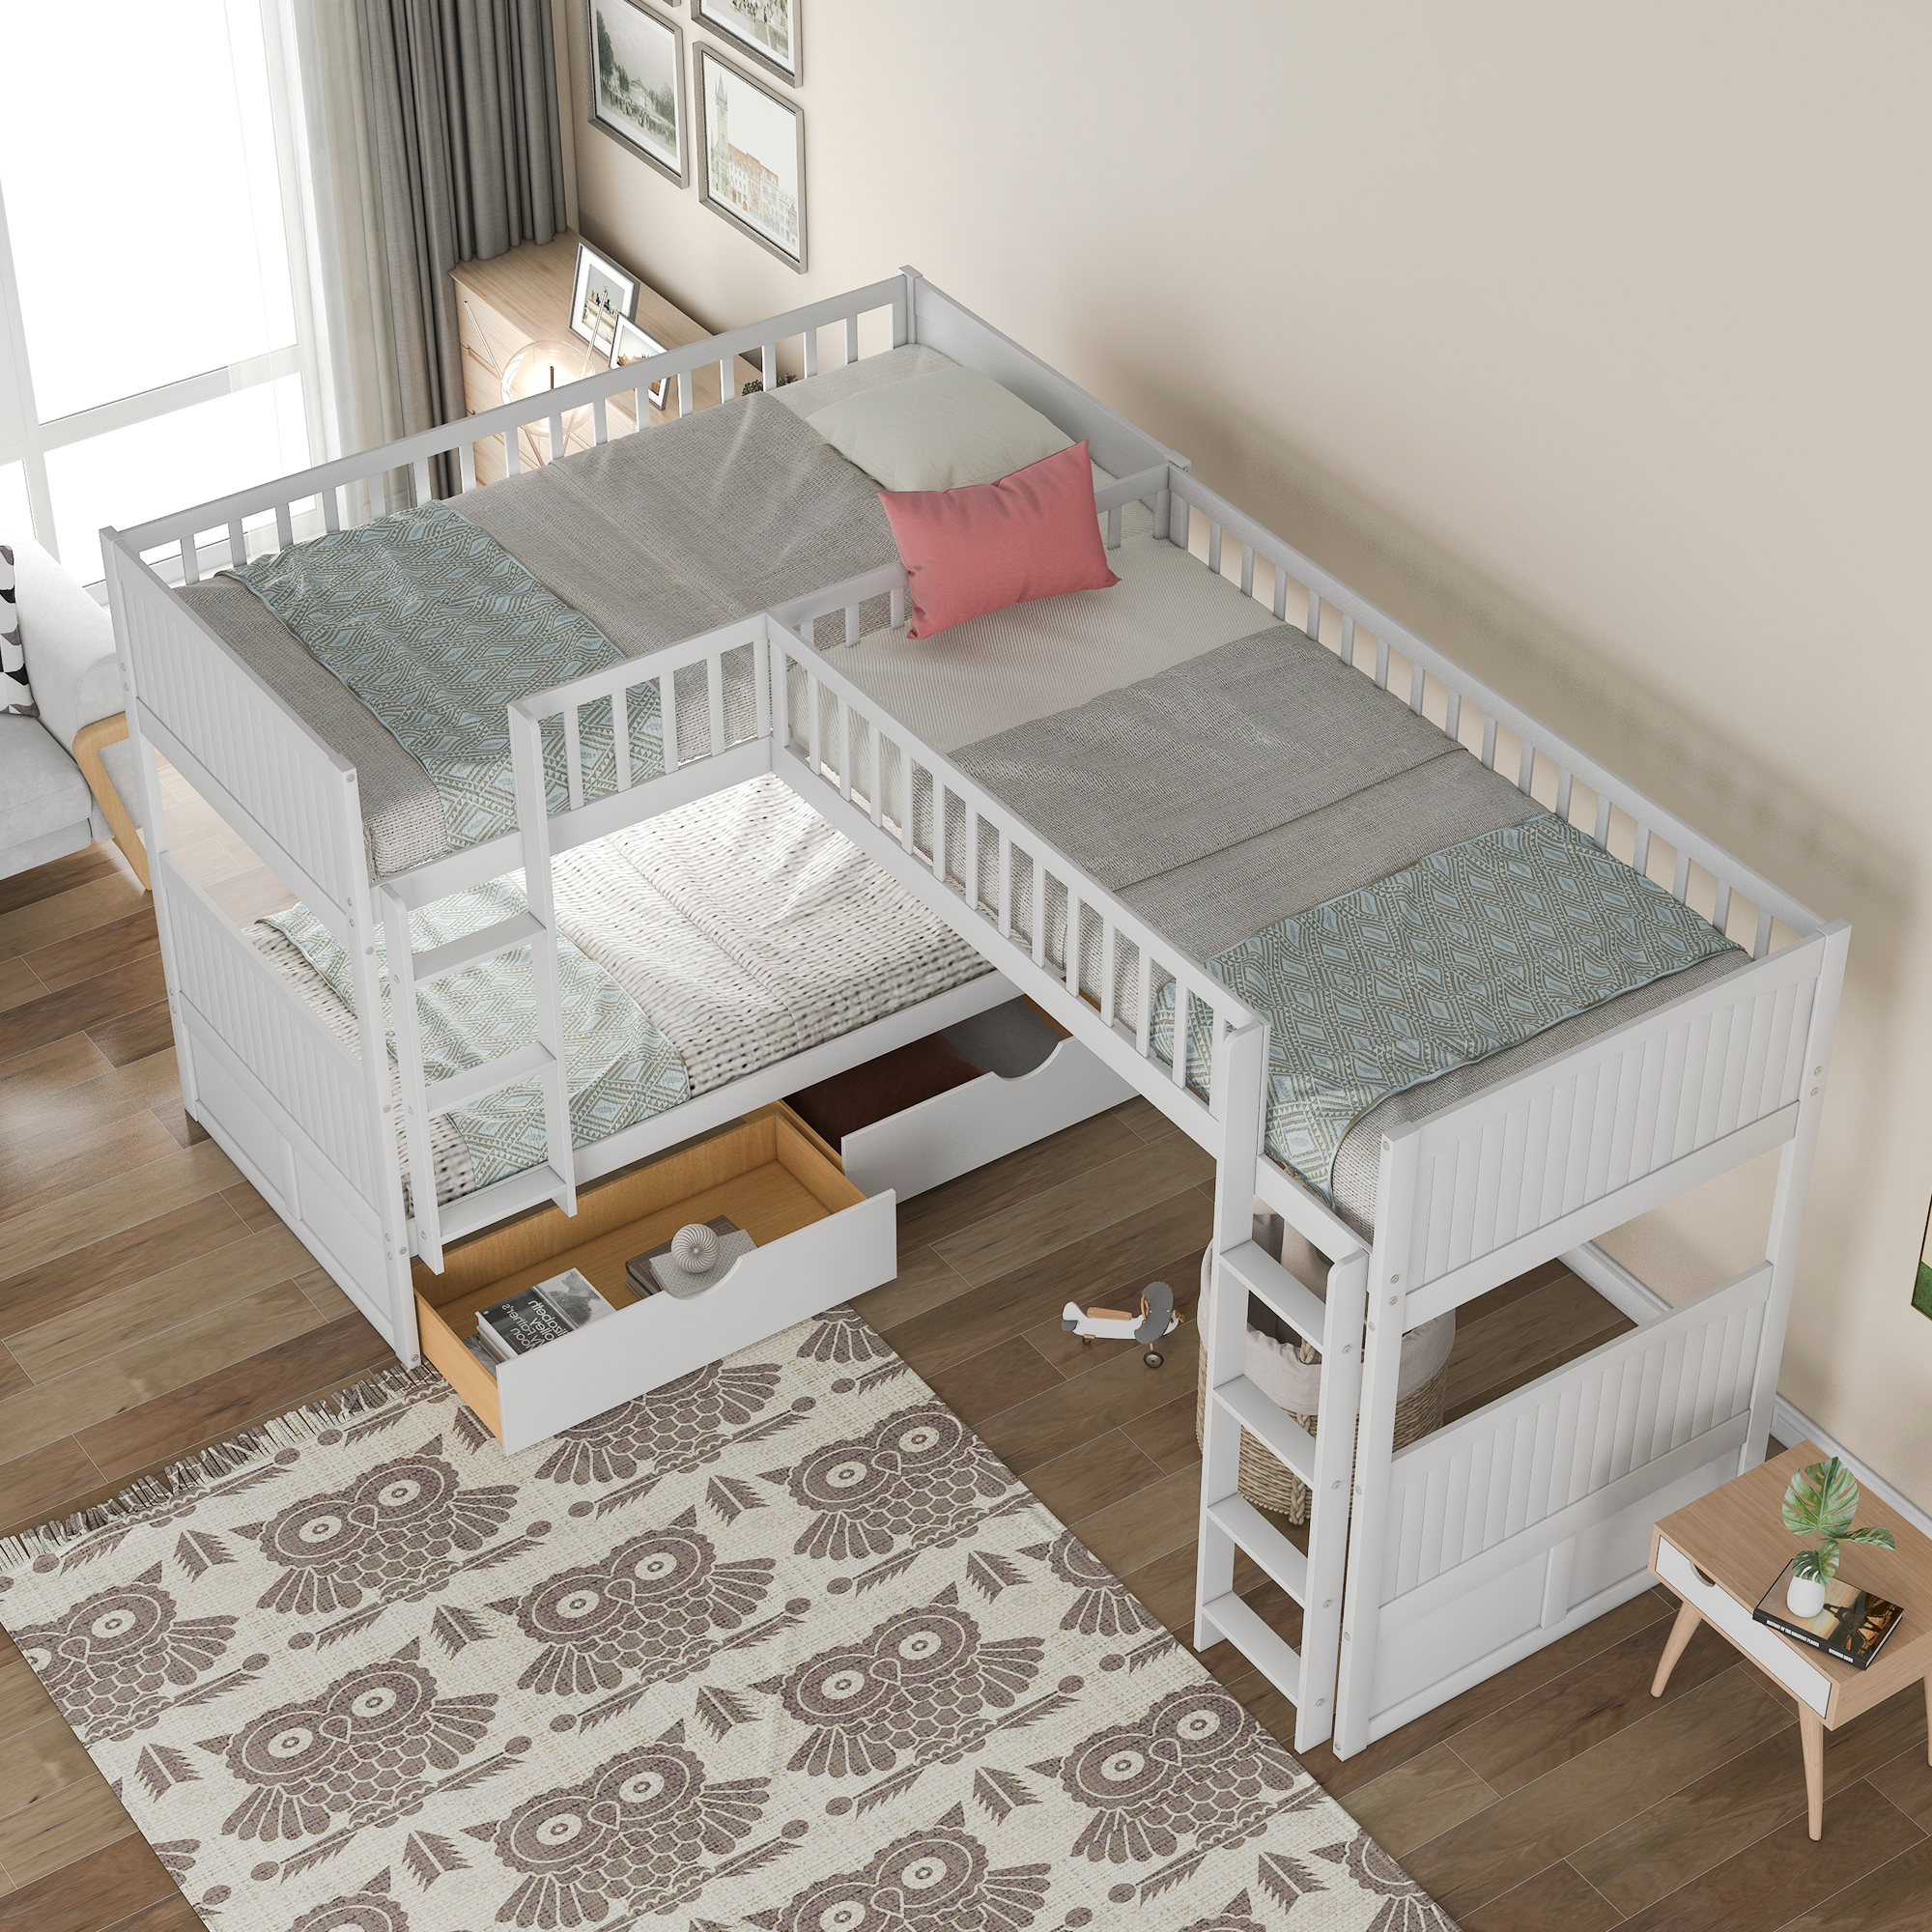 Euroco Wood Bunk Bed Storage, Twin-over-Twin-over-Twin for Children's Bedroom, White - image 2 of 12